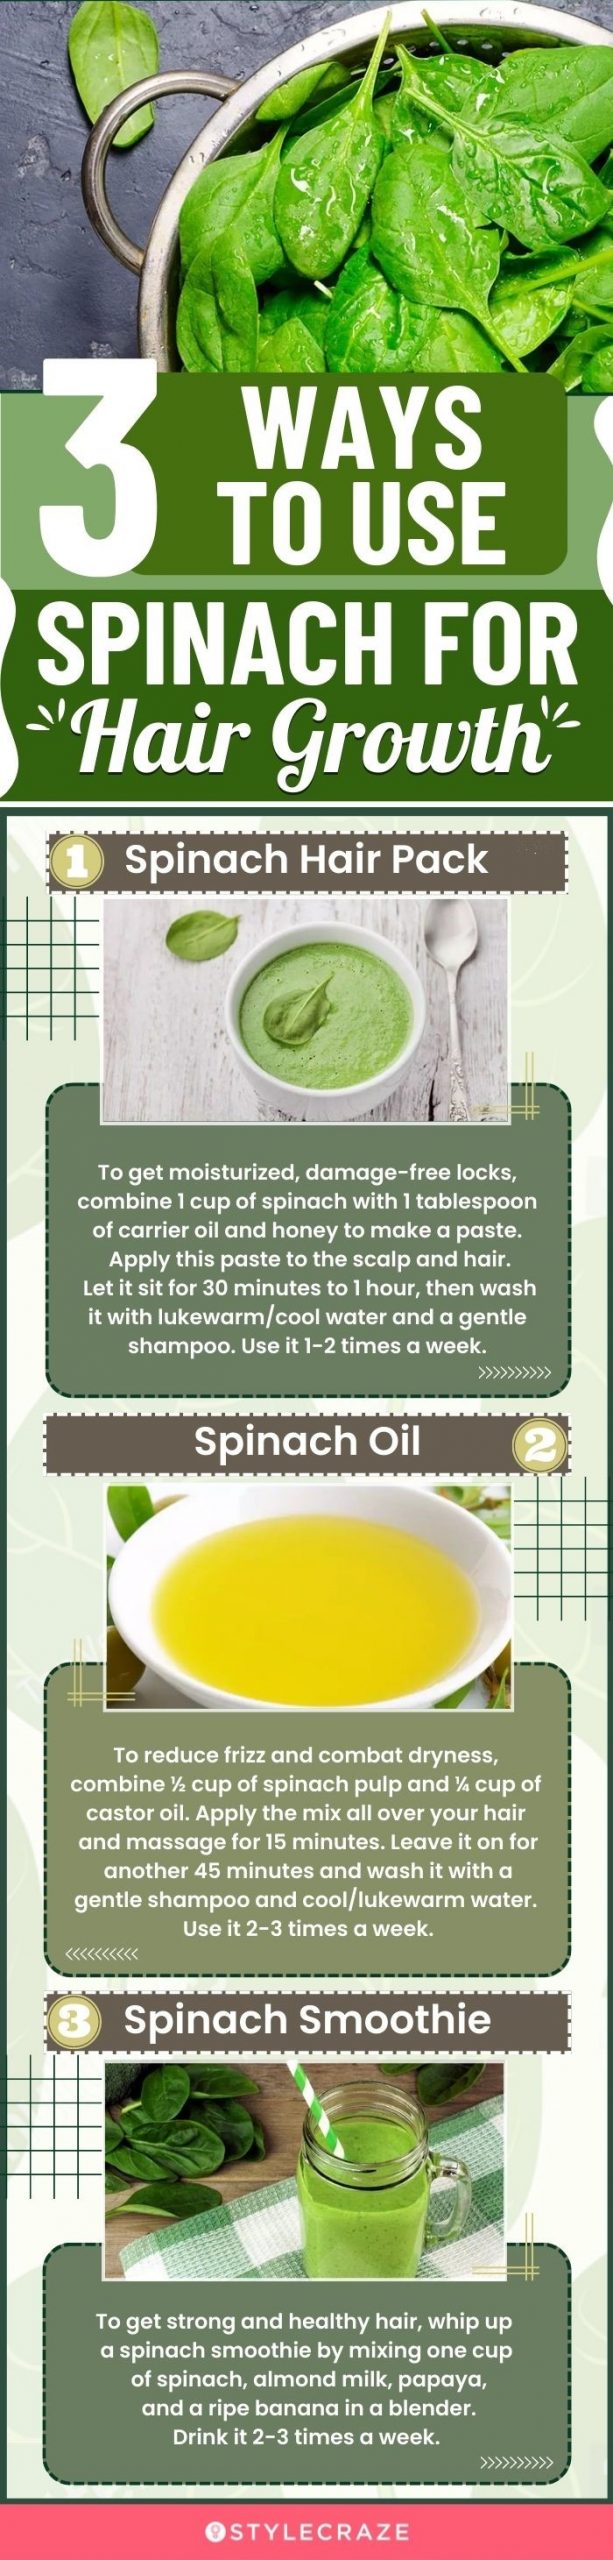 3 ways to use spinach for hair growth (infographic)